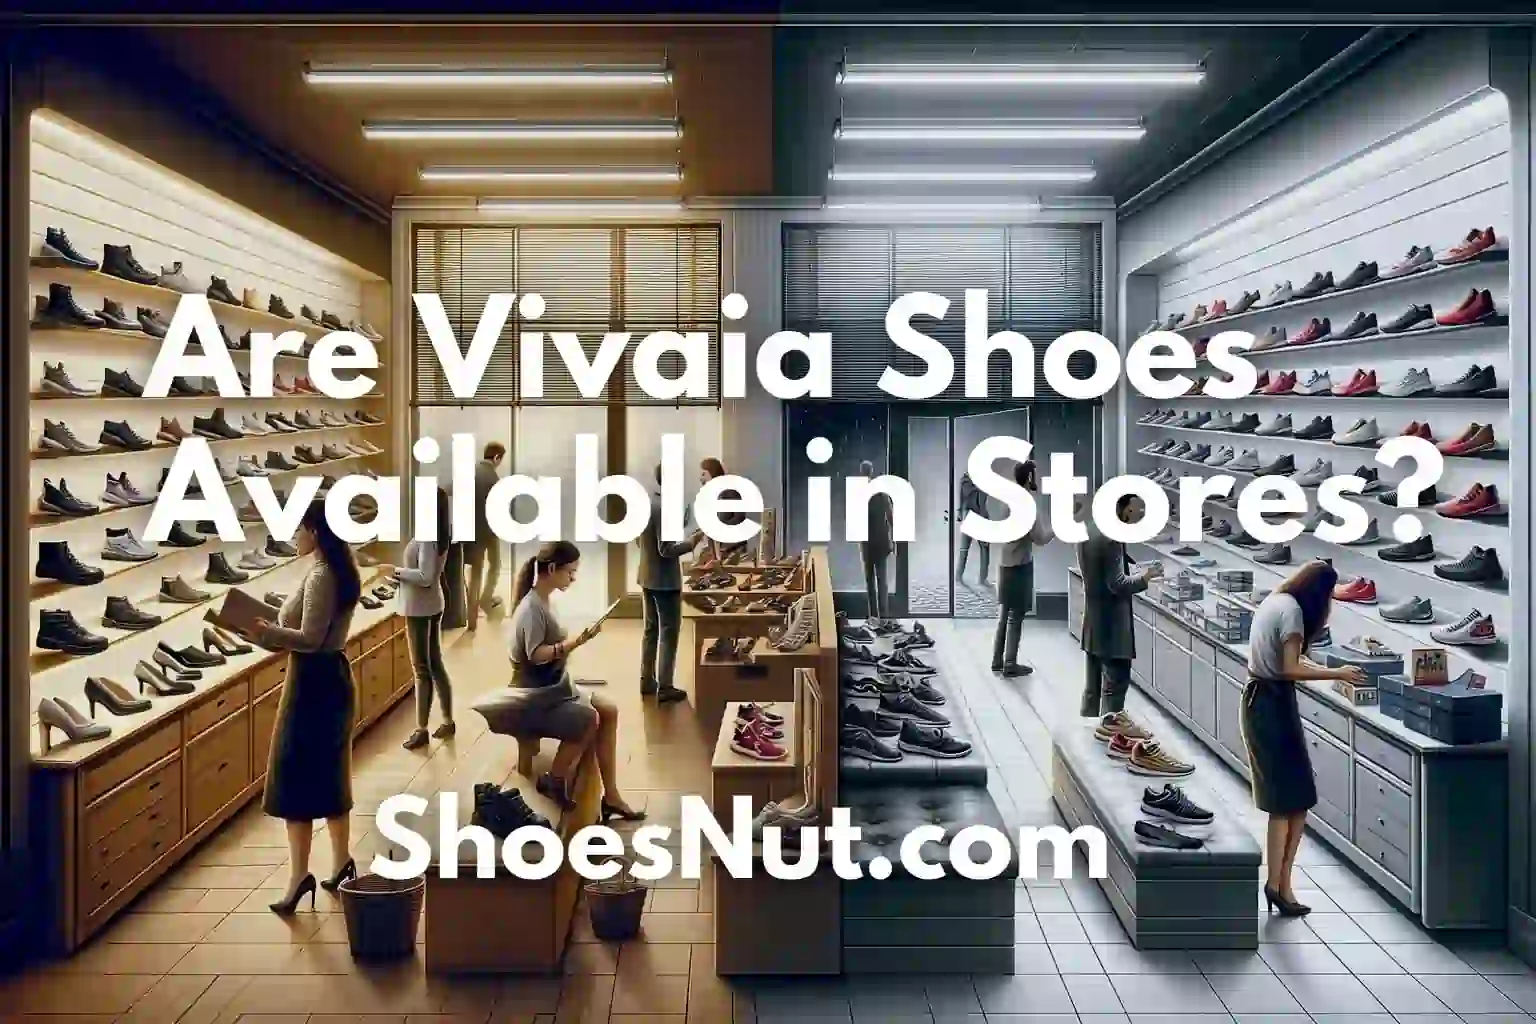 Are Vivaia Shoes Available in Stores?